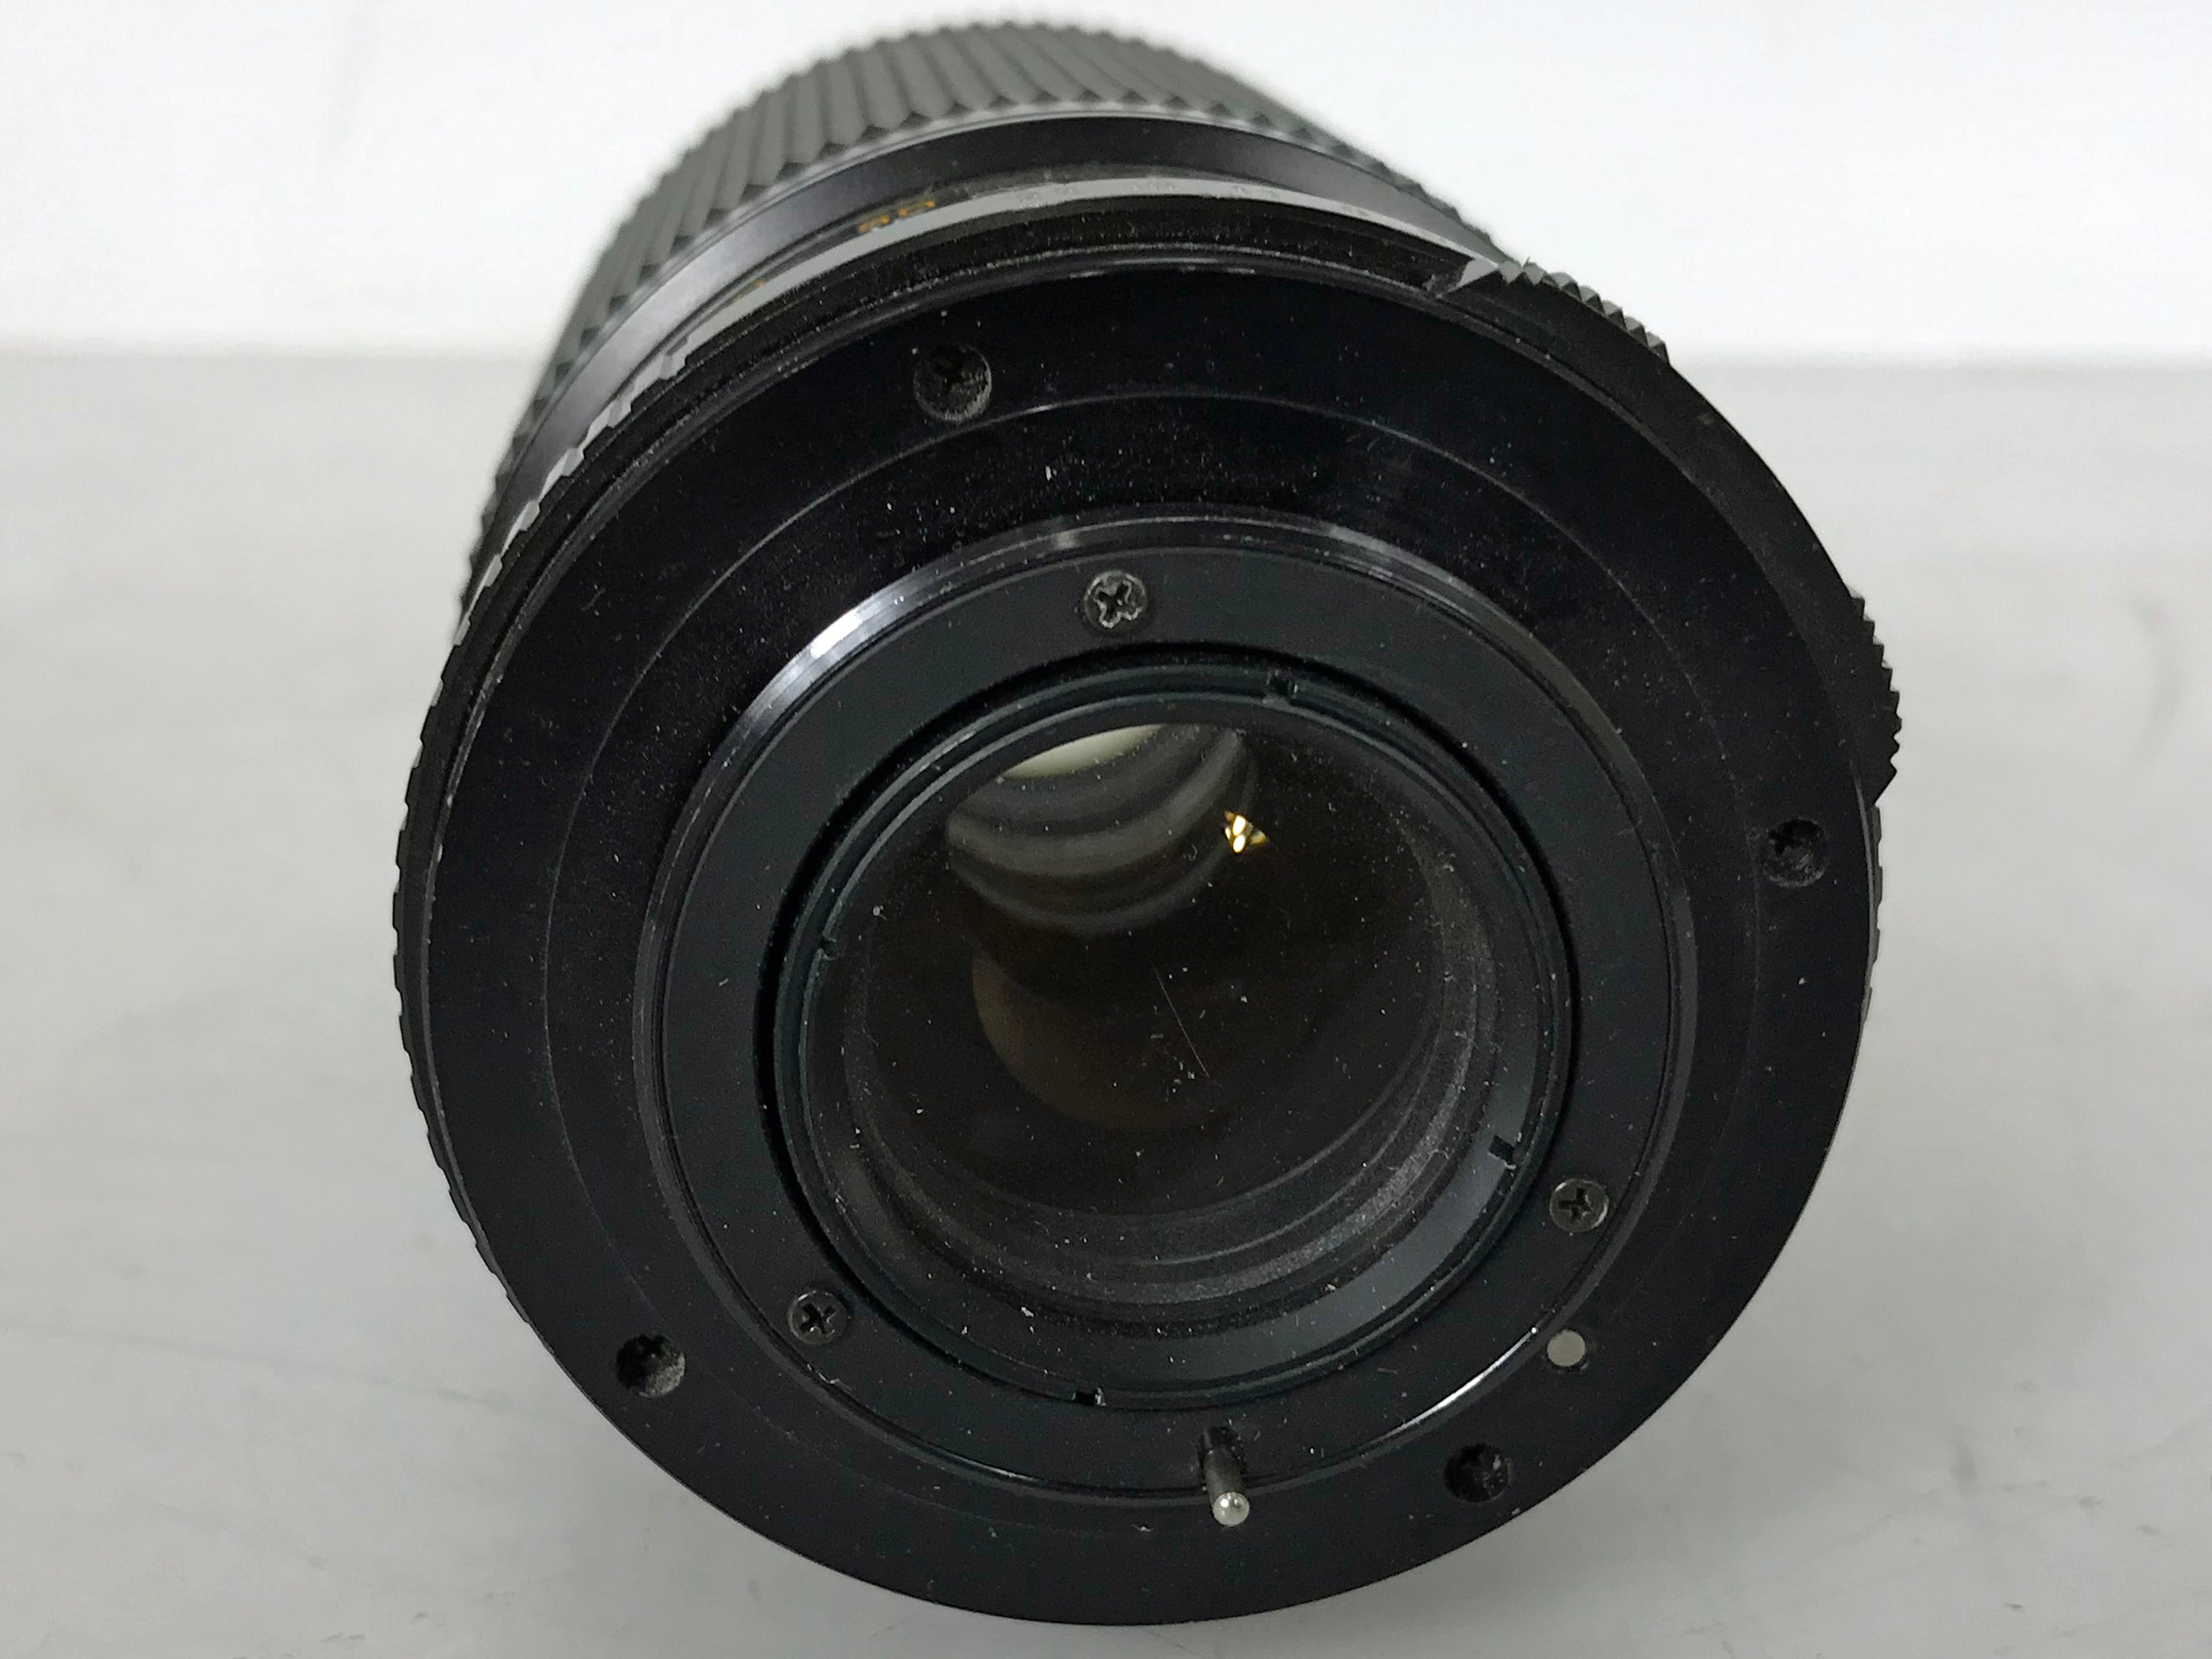 Cambron 80-200mm F4.5 Zoom Lens